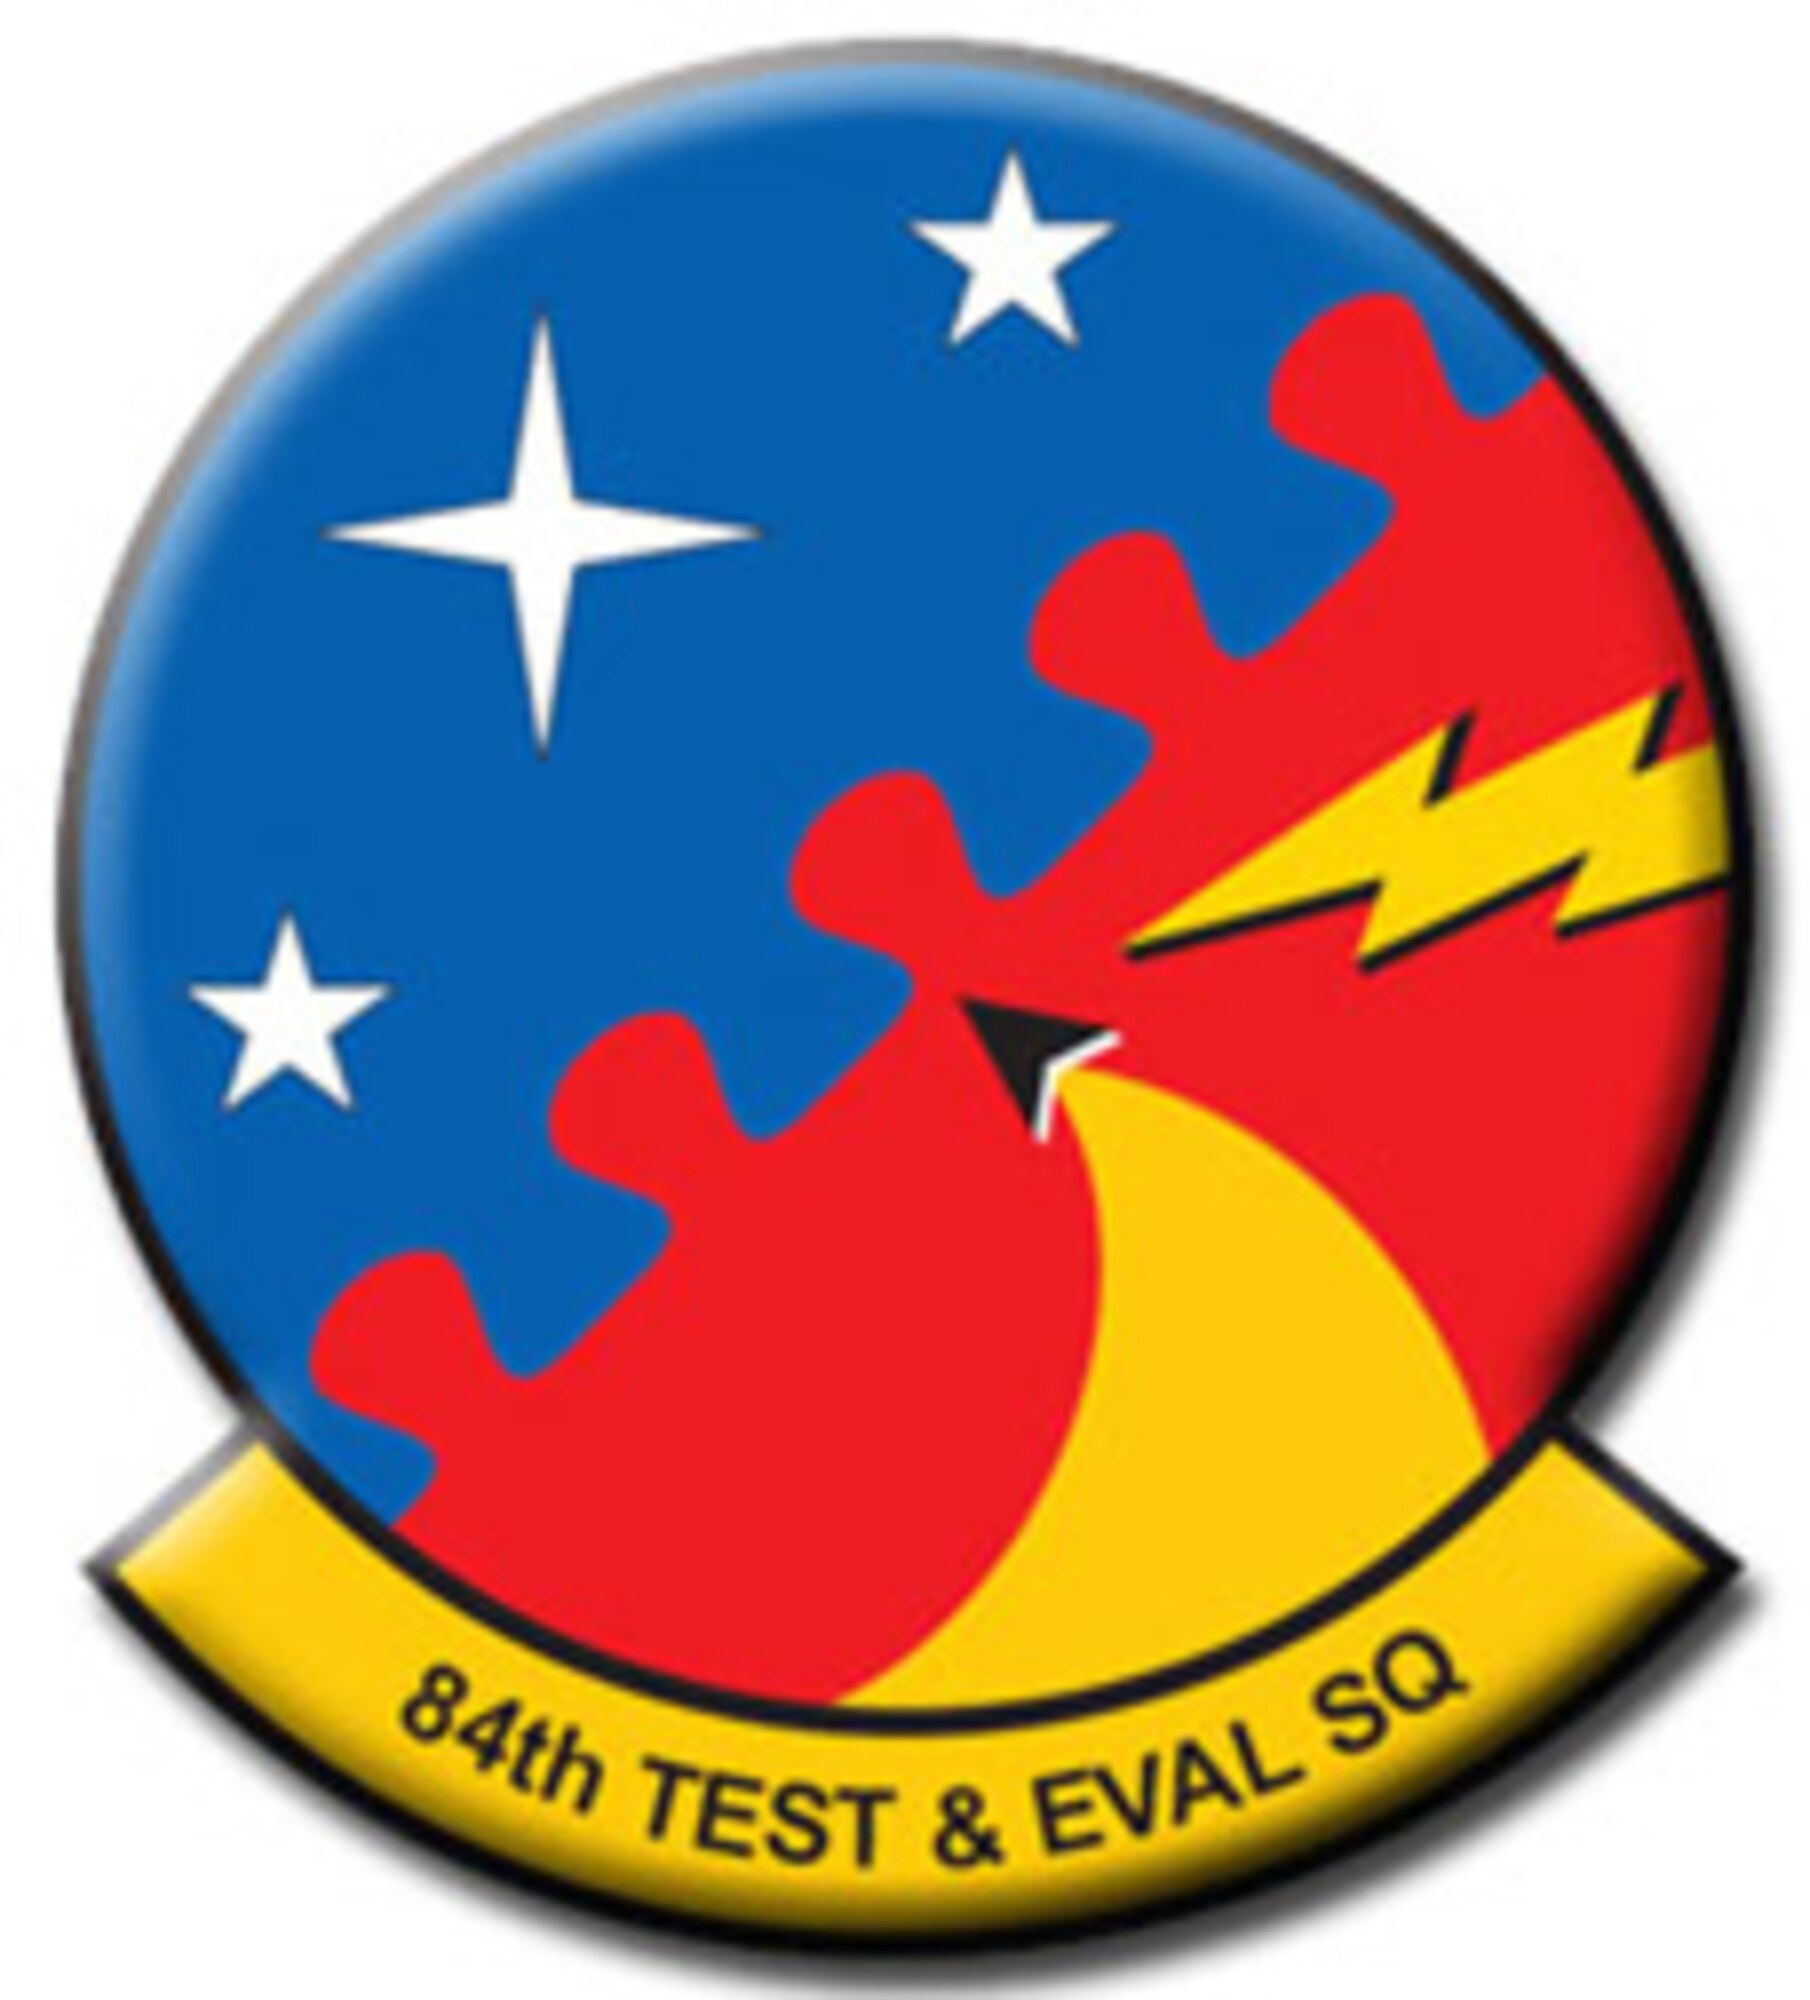 84th Test and Evaluation Squadron patch